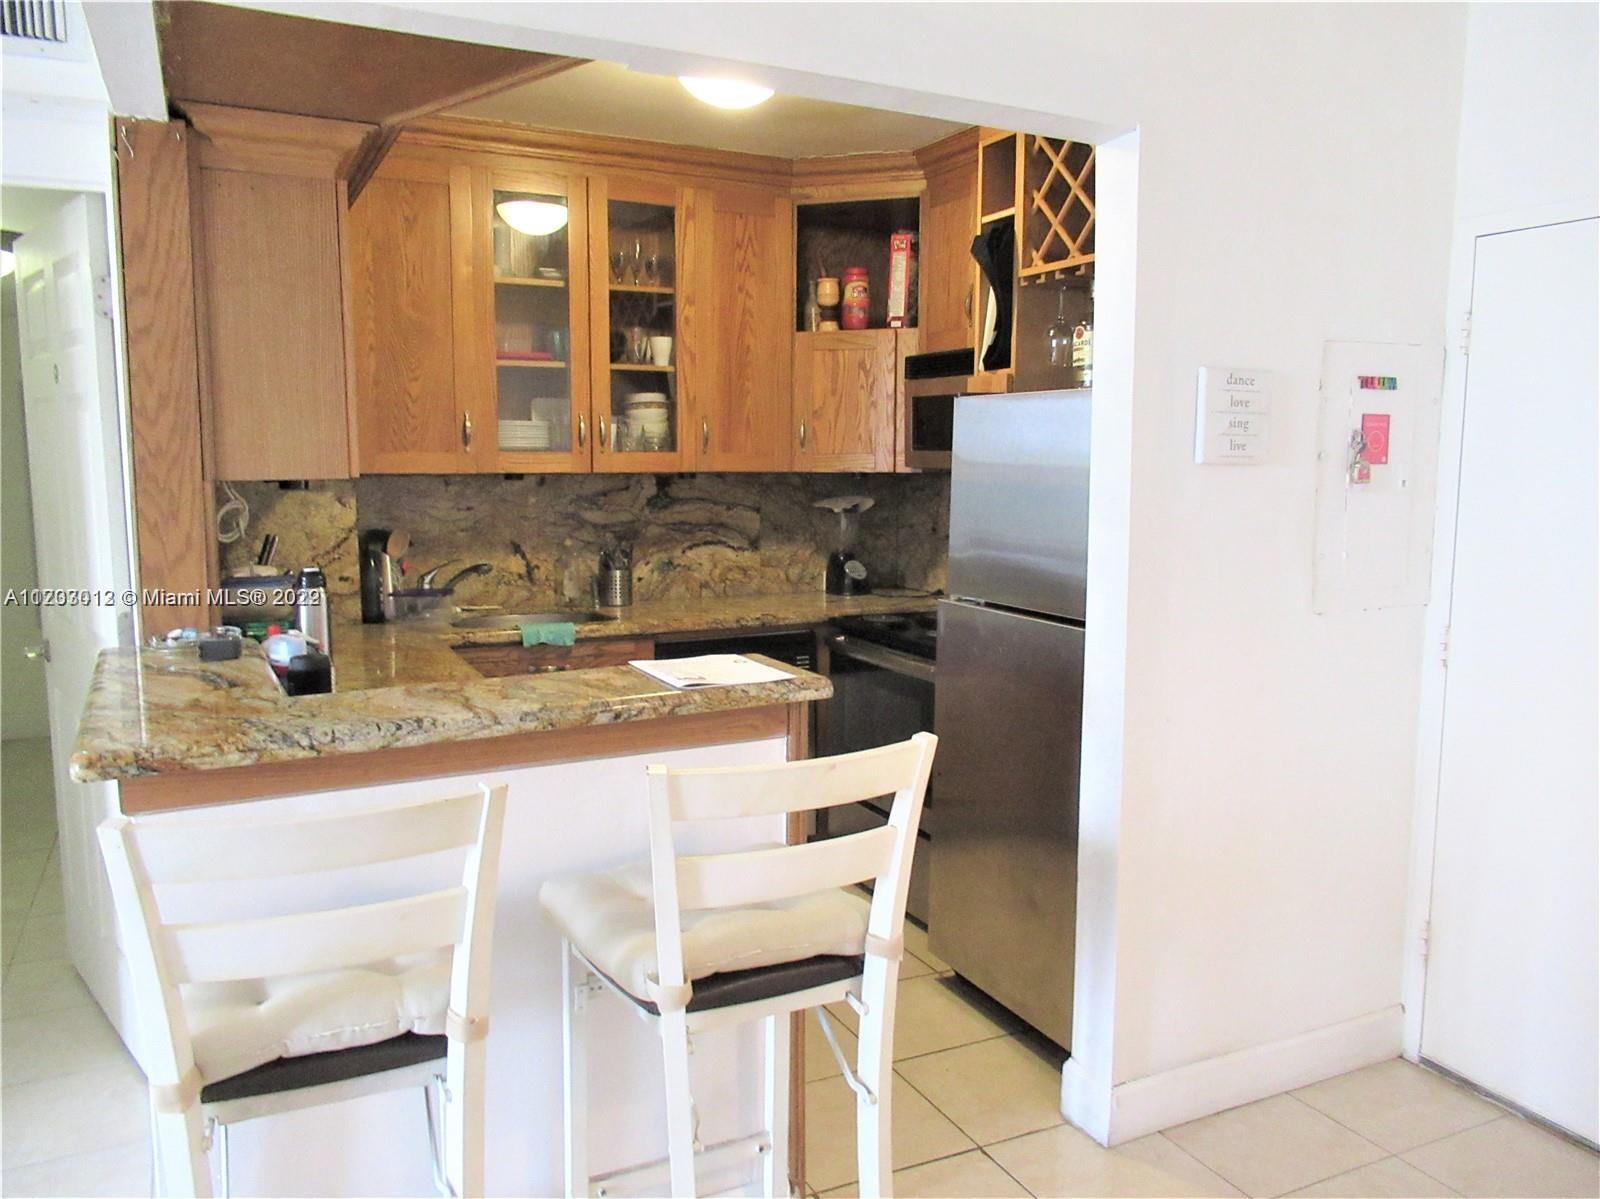 Unit is tenant occupied. Large 2 bedrooms and 2 bathrooms in one of the quiet areas of Miami Beach. 